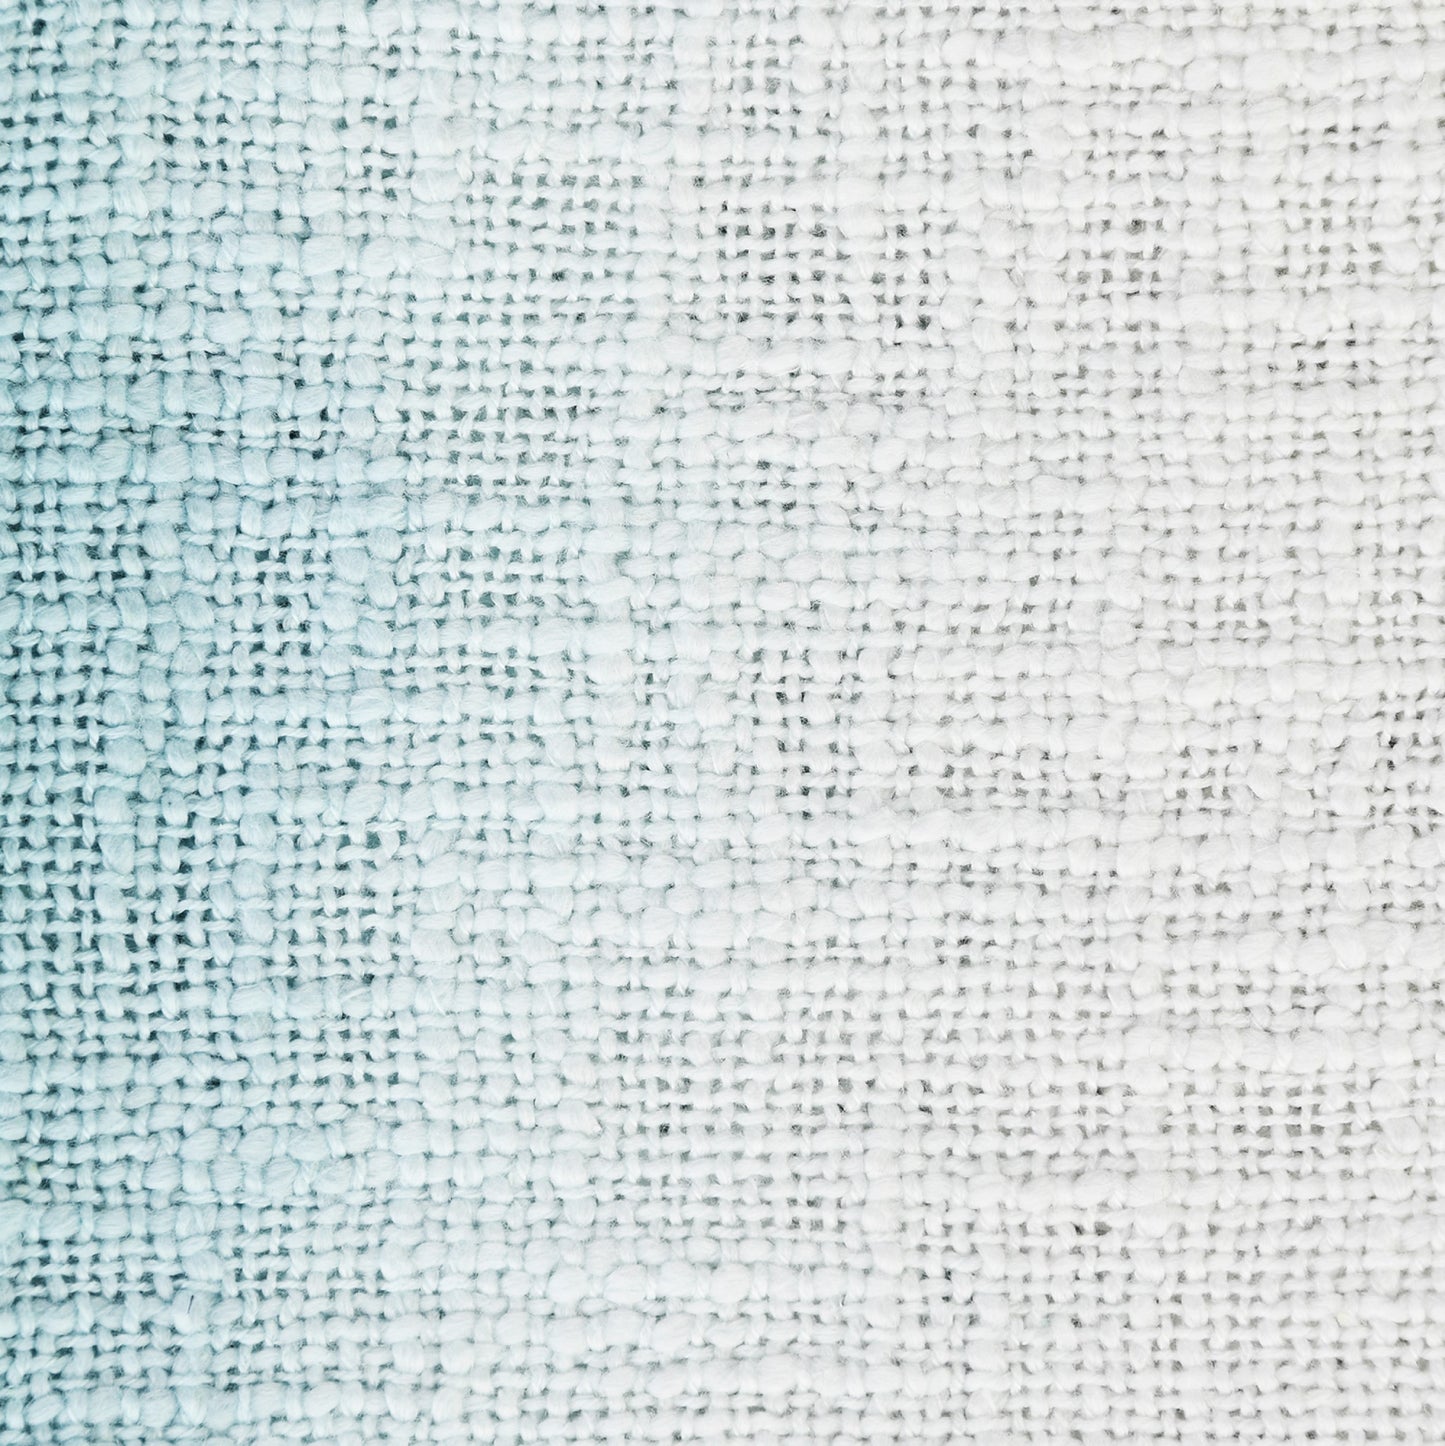 Blue and White Woven Cotton Ombre Throw Blanket